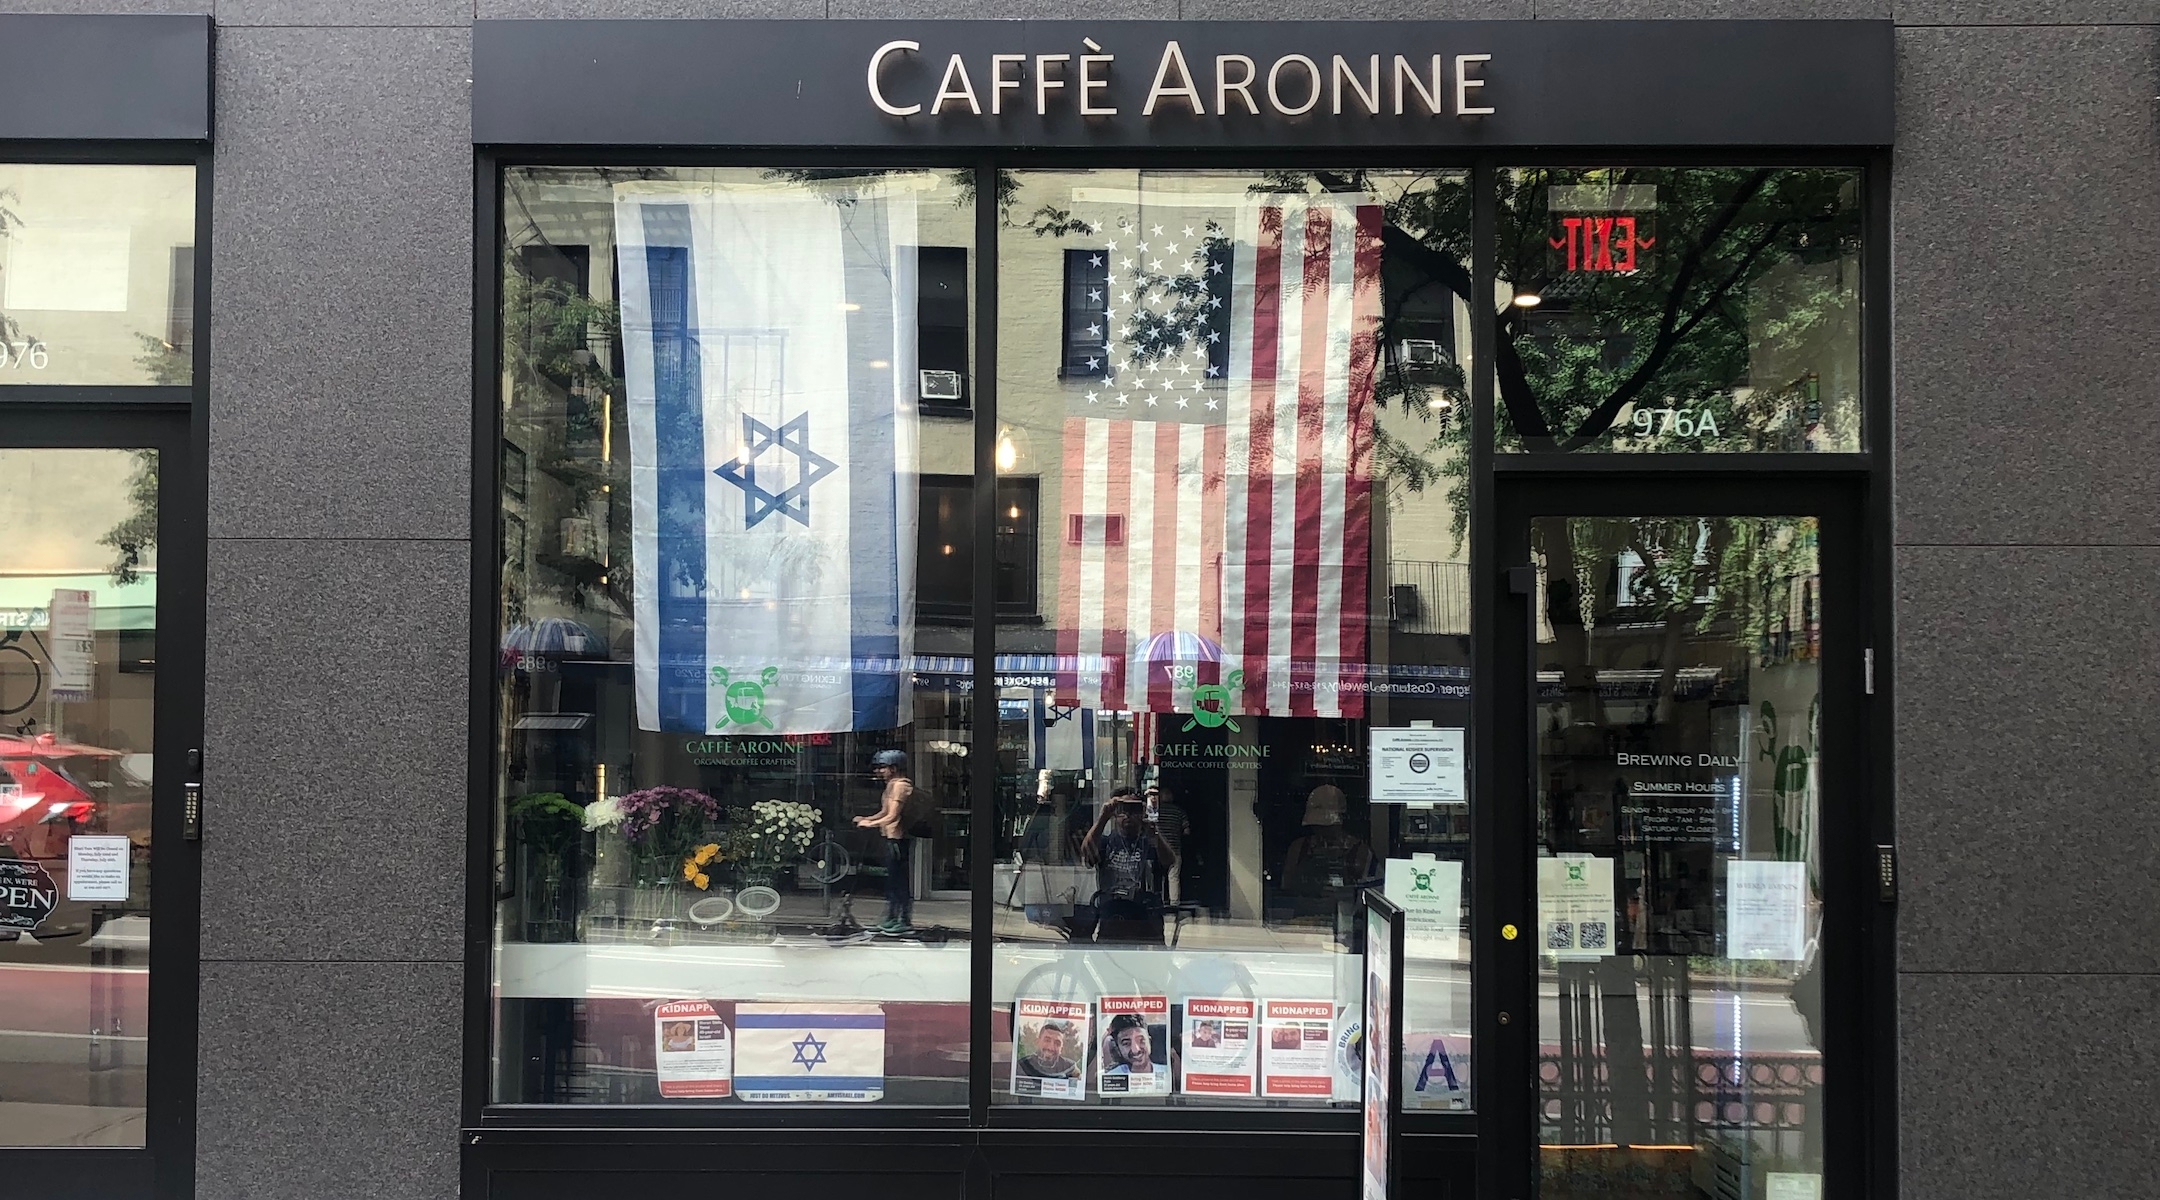 The Upper East Side’s Caffe Aronne has gone kosher, months after making news for its pro-Israel stance